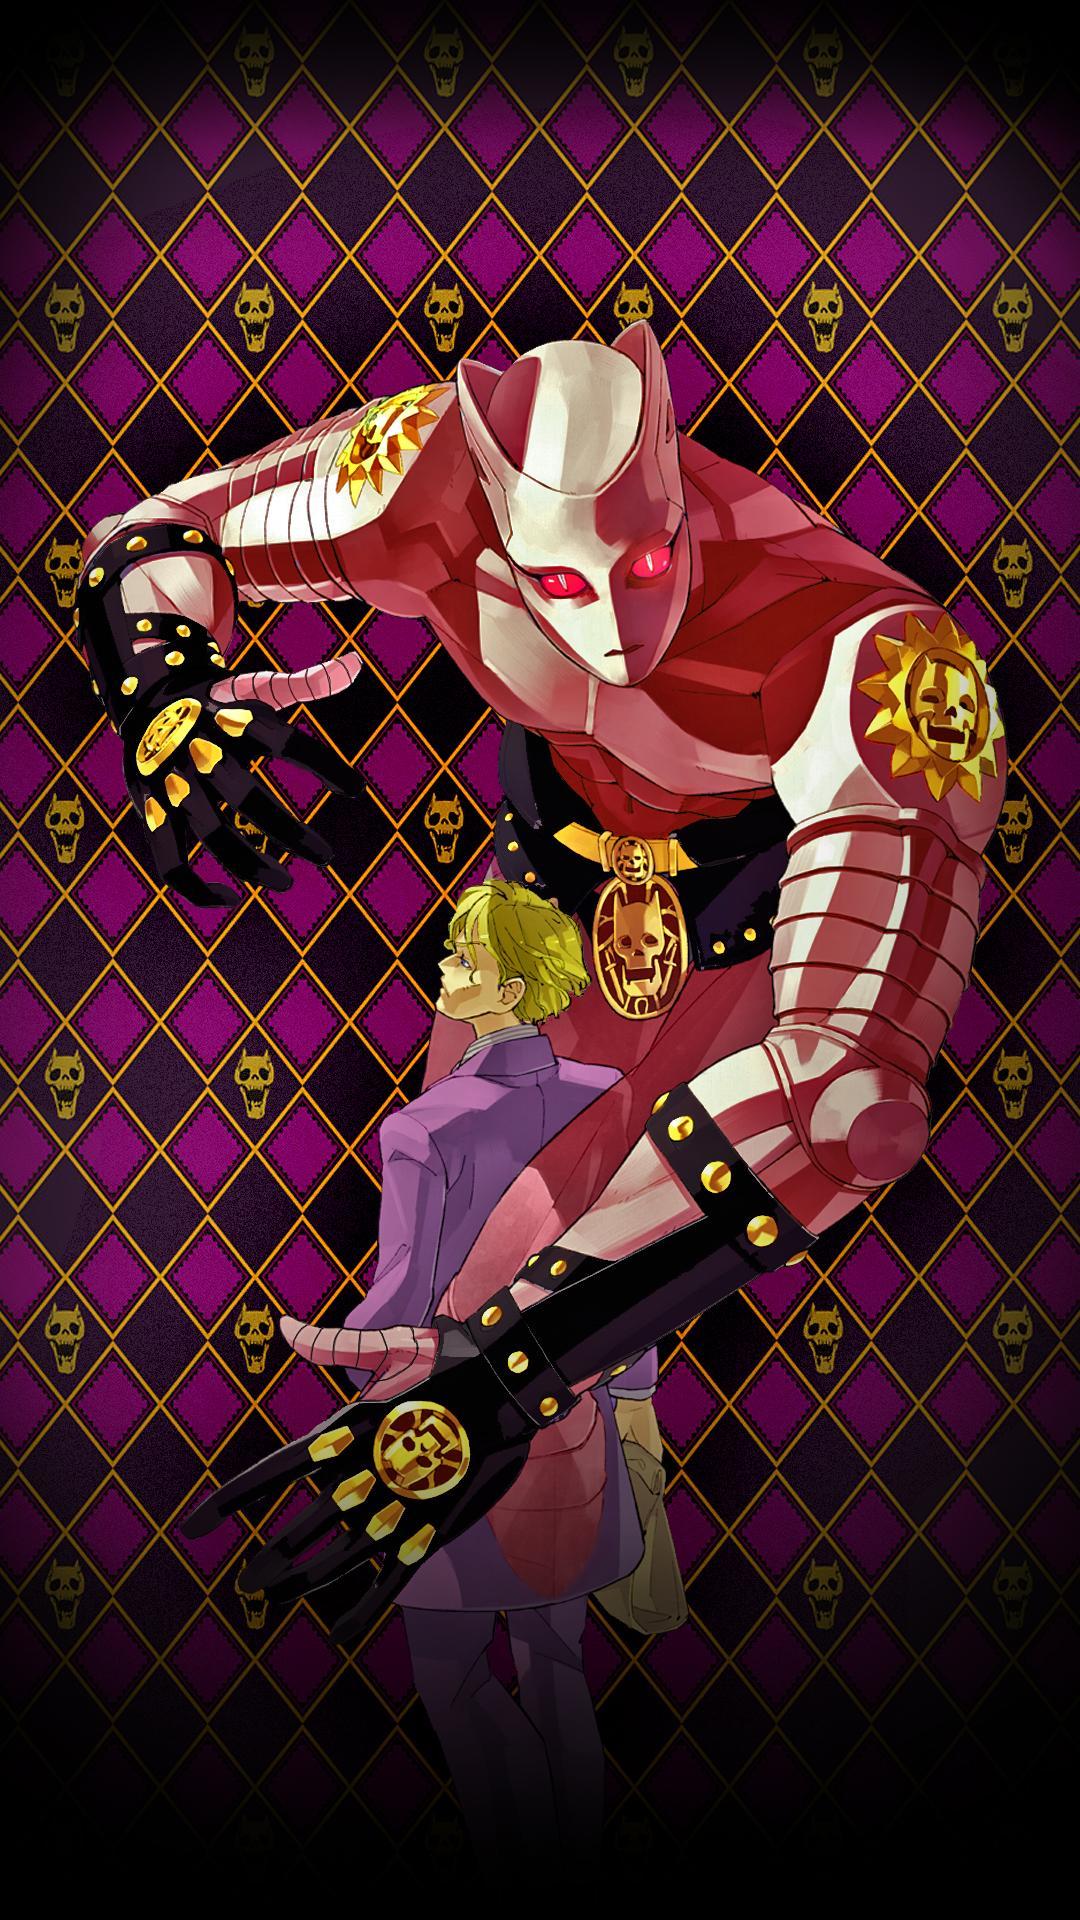 Fanart With all these Killer Queen wallpaper going around